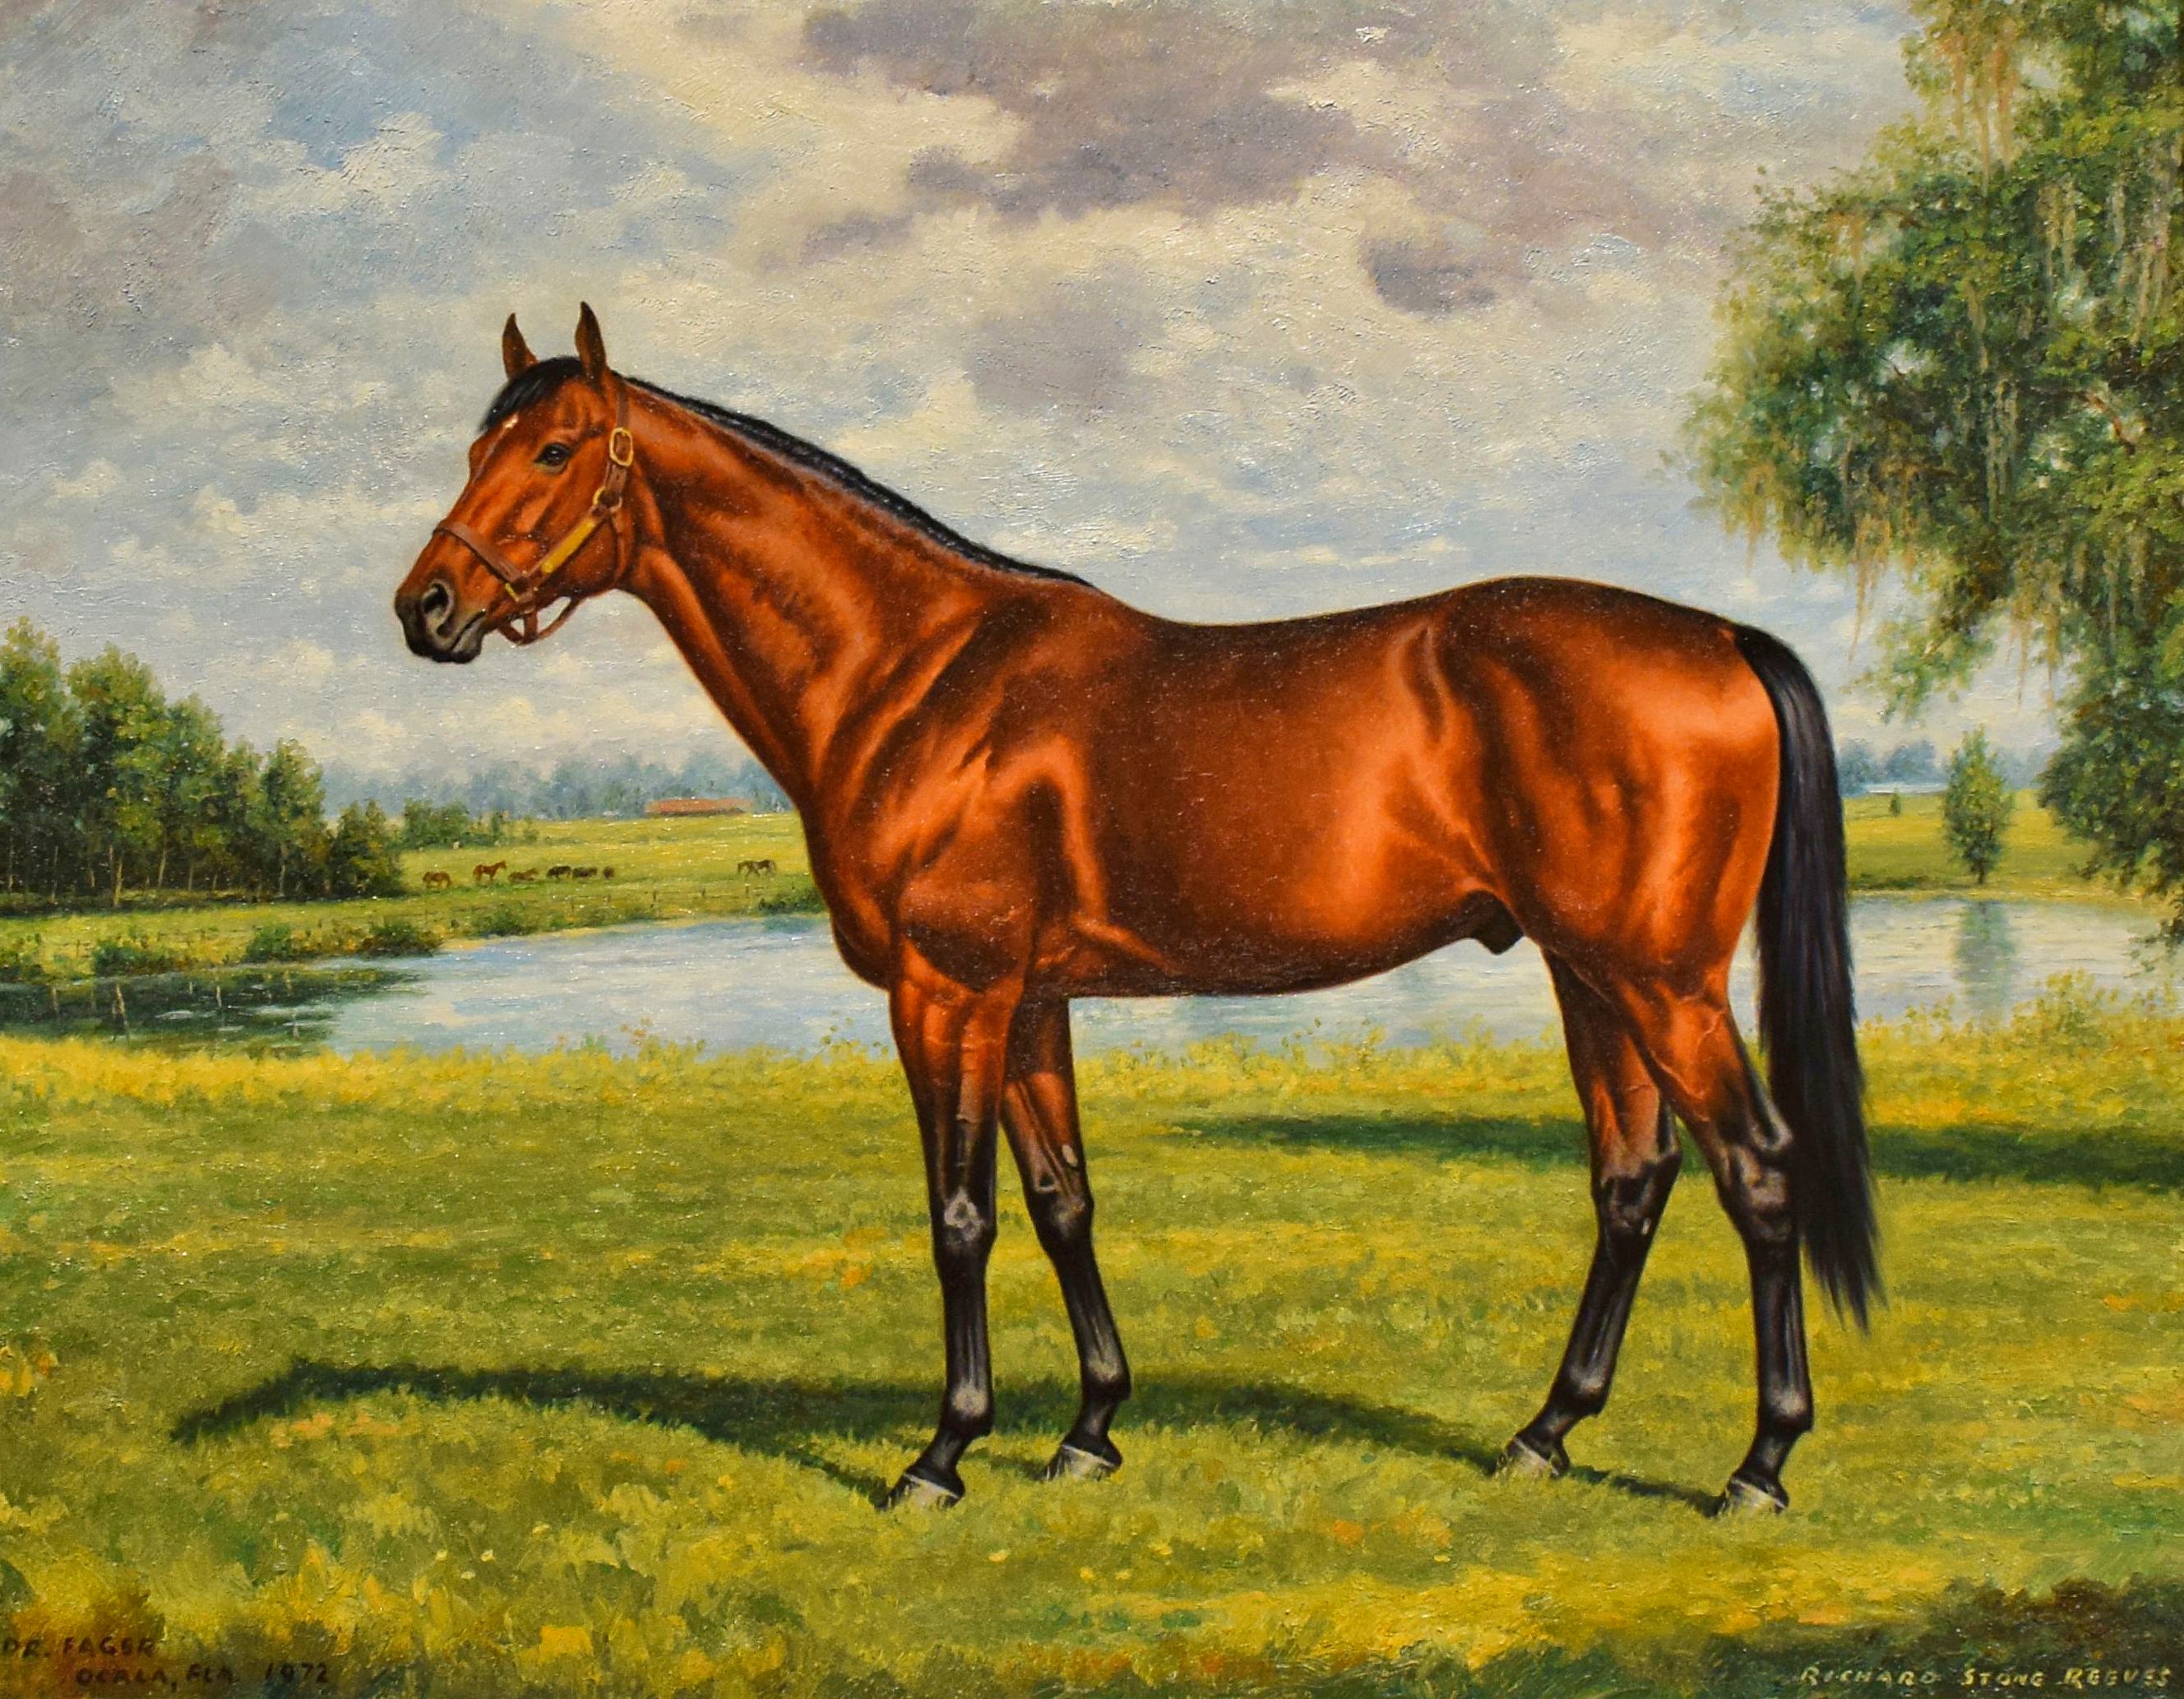 Portrait of Dr. Fager by Richard Stone Reeves, 1972 (Museum Collection)